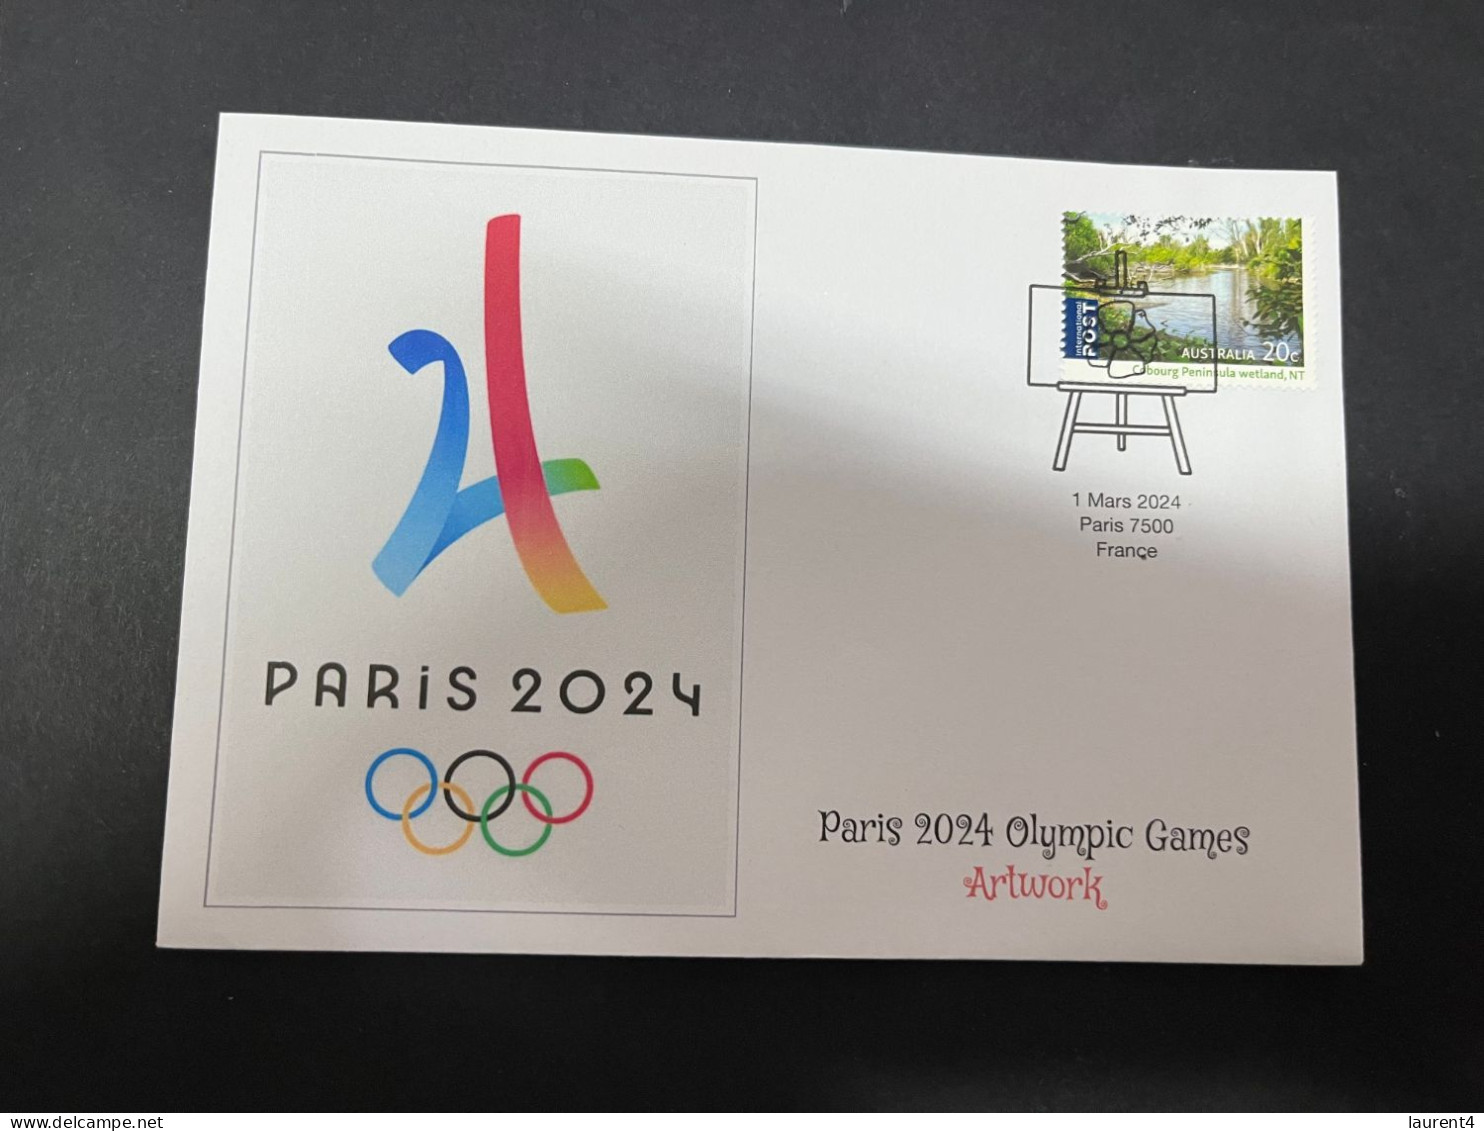 10-3-2024 (2 Y 37) Paris Olympic Games 2024 - 5 (of 12 Covers Series) For The Paris 2024 Olympic Games Artwork - Estate 2024 : Parigi